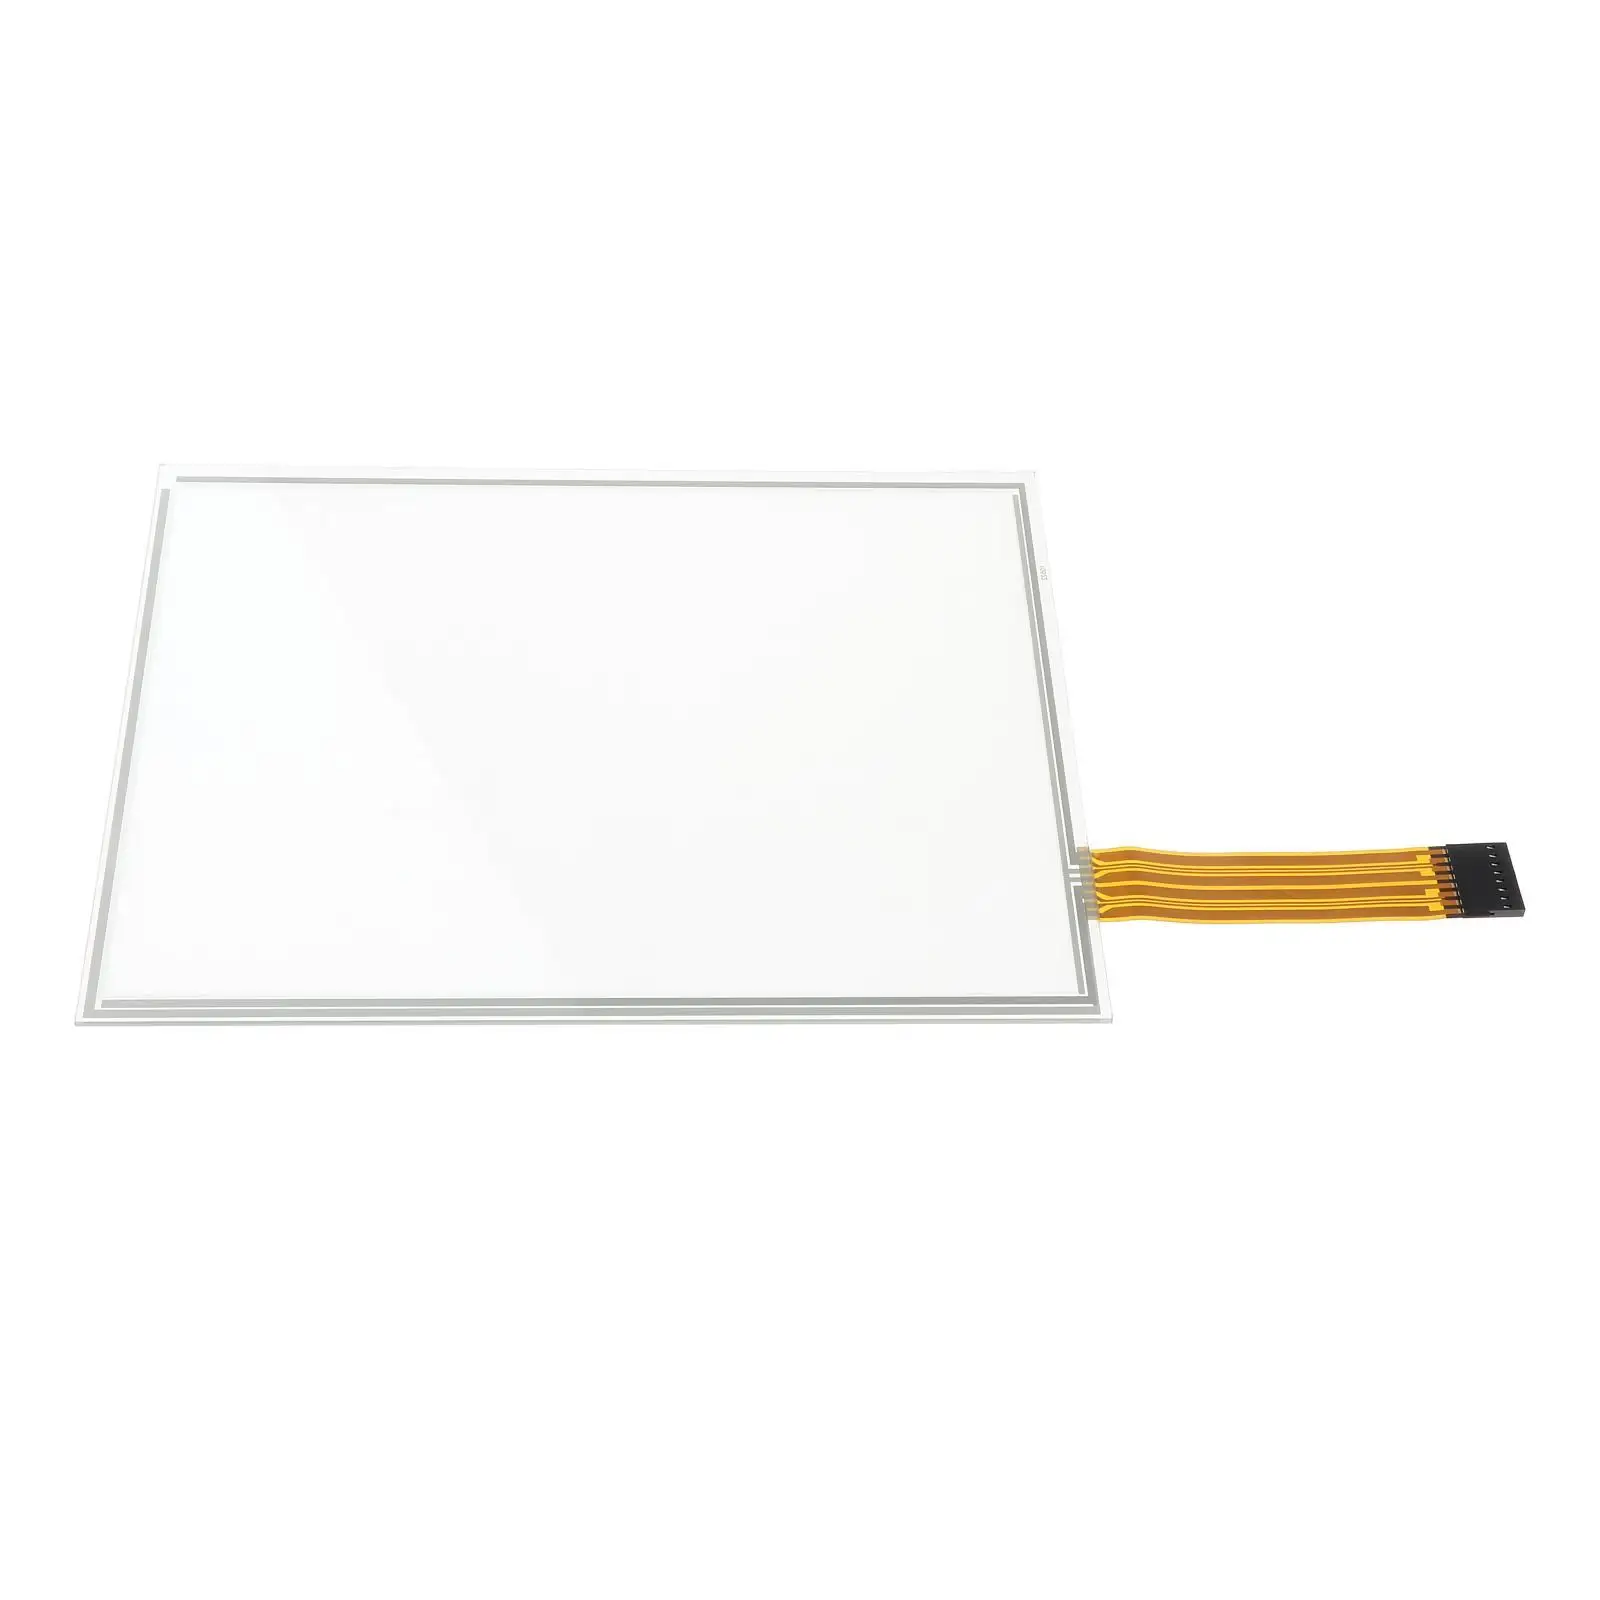 Touch Screen Digitizer PF80877 PF81076 PF81185 PF81378 LCD Display Panel for Greenstar GS2 2600 Monitor Stable Performance